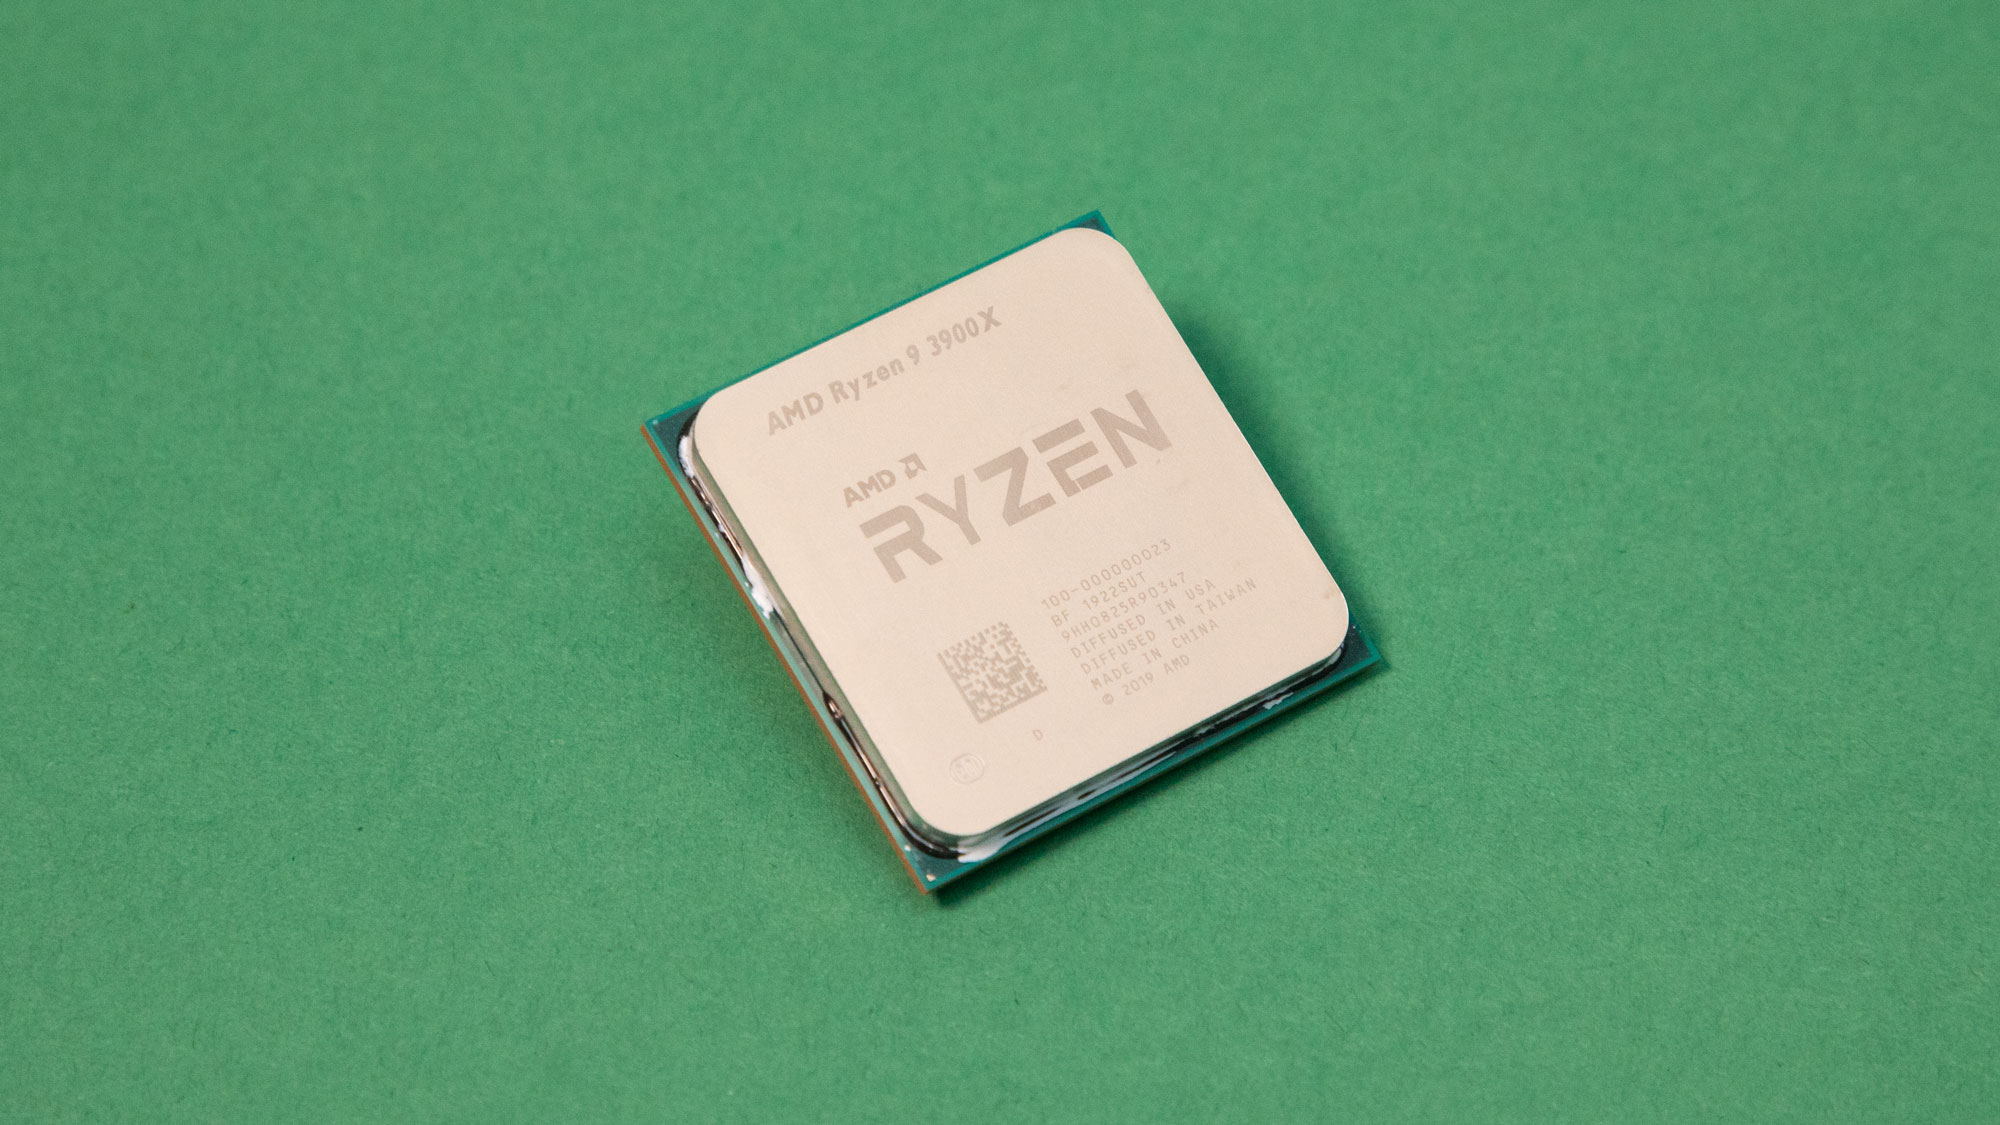 AMD Ryzen 9 3900X CPU remains hard to buy – with prices now